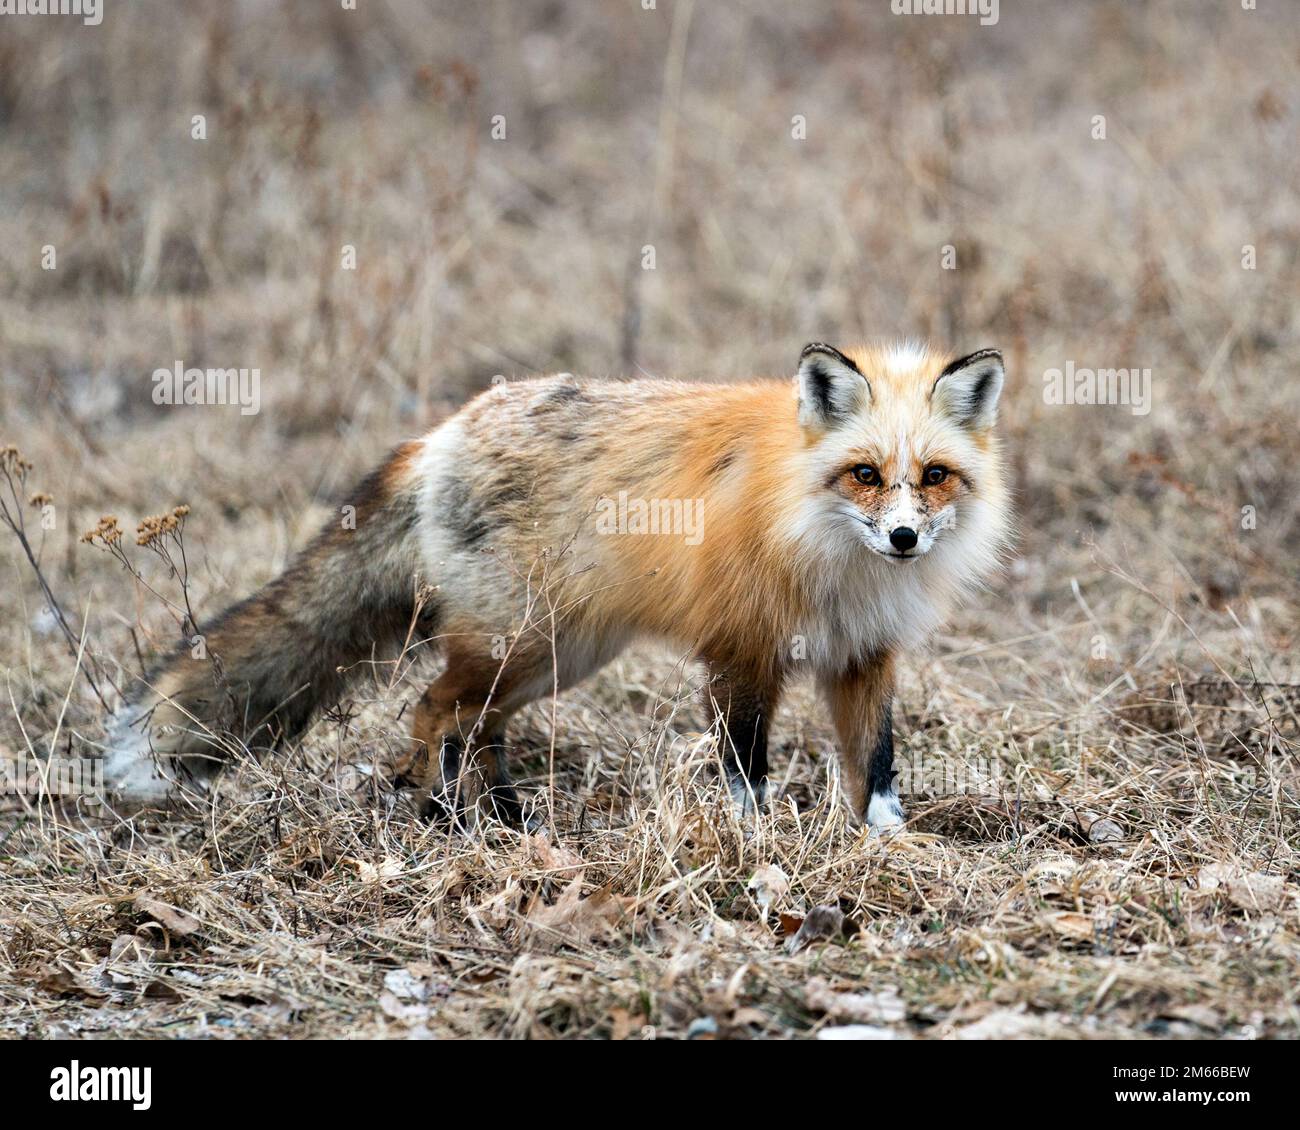 Red unique fox close-up side profile view and looking at camera in the spring season in its environment and habitat with blur background. Fox Image. P Stock Photo